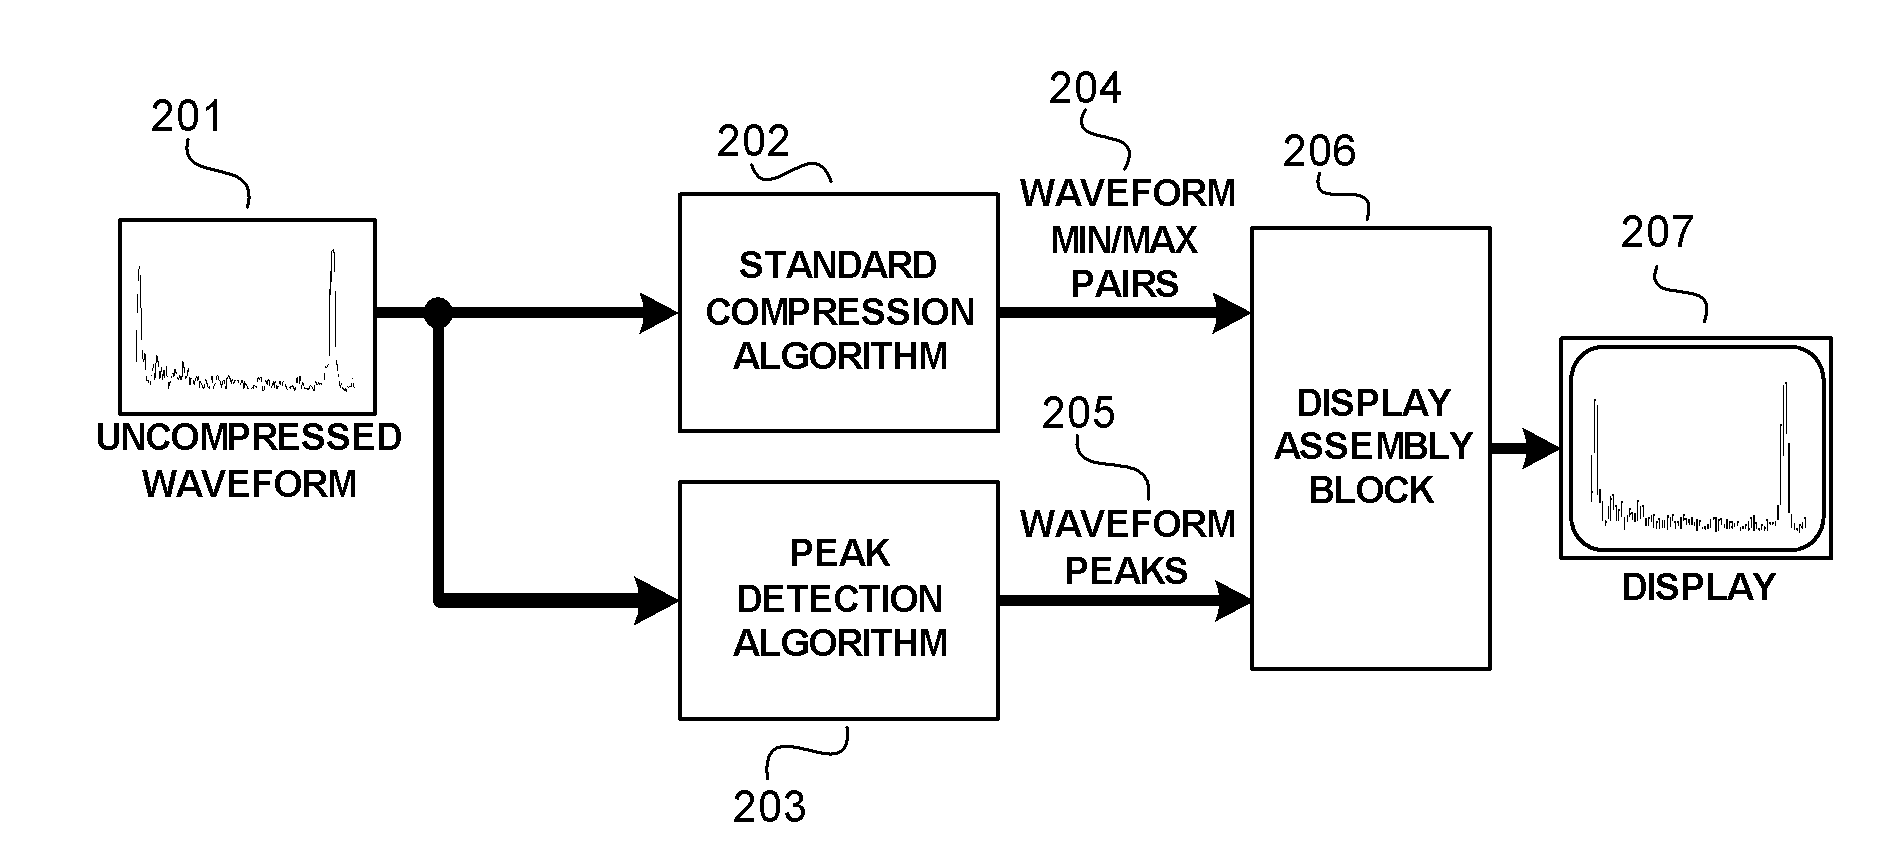 Peak visualization enhancement display system for use with a compressed waveform display on a non-destructive inspection instrument